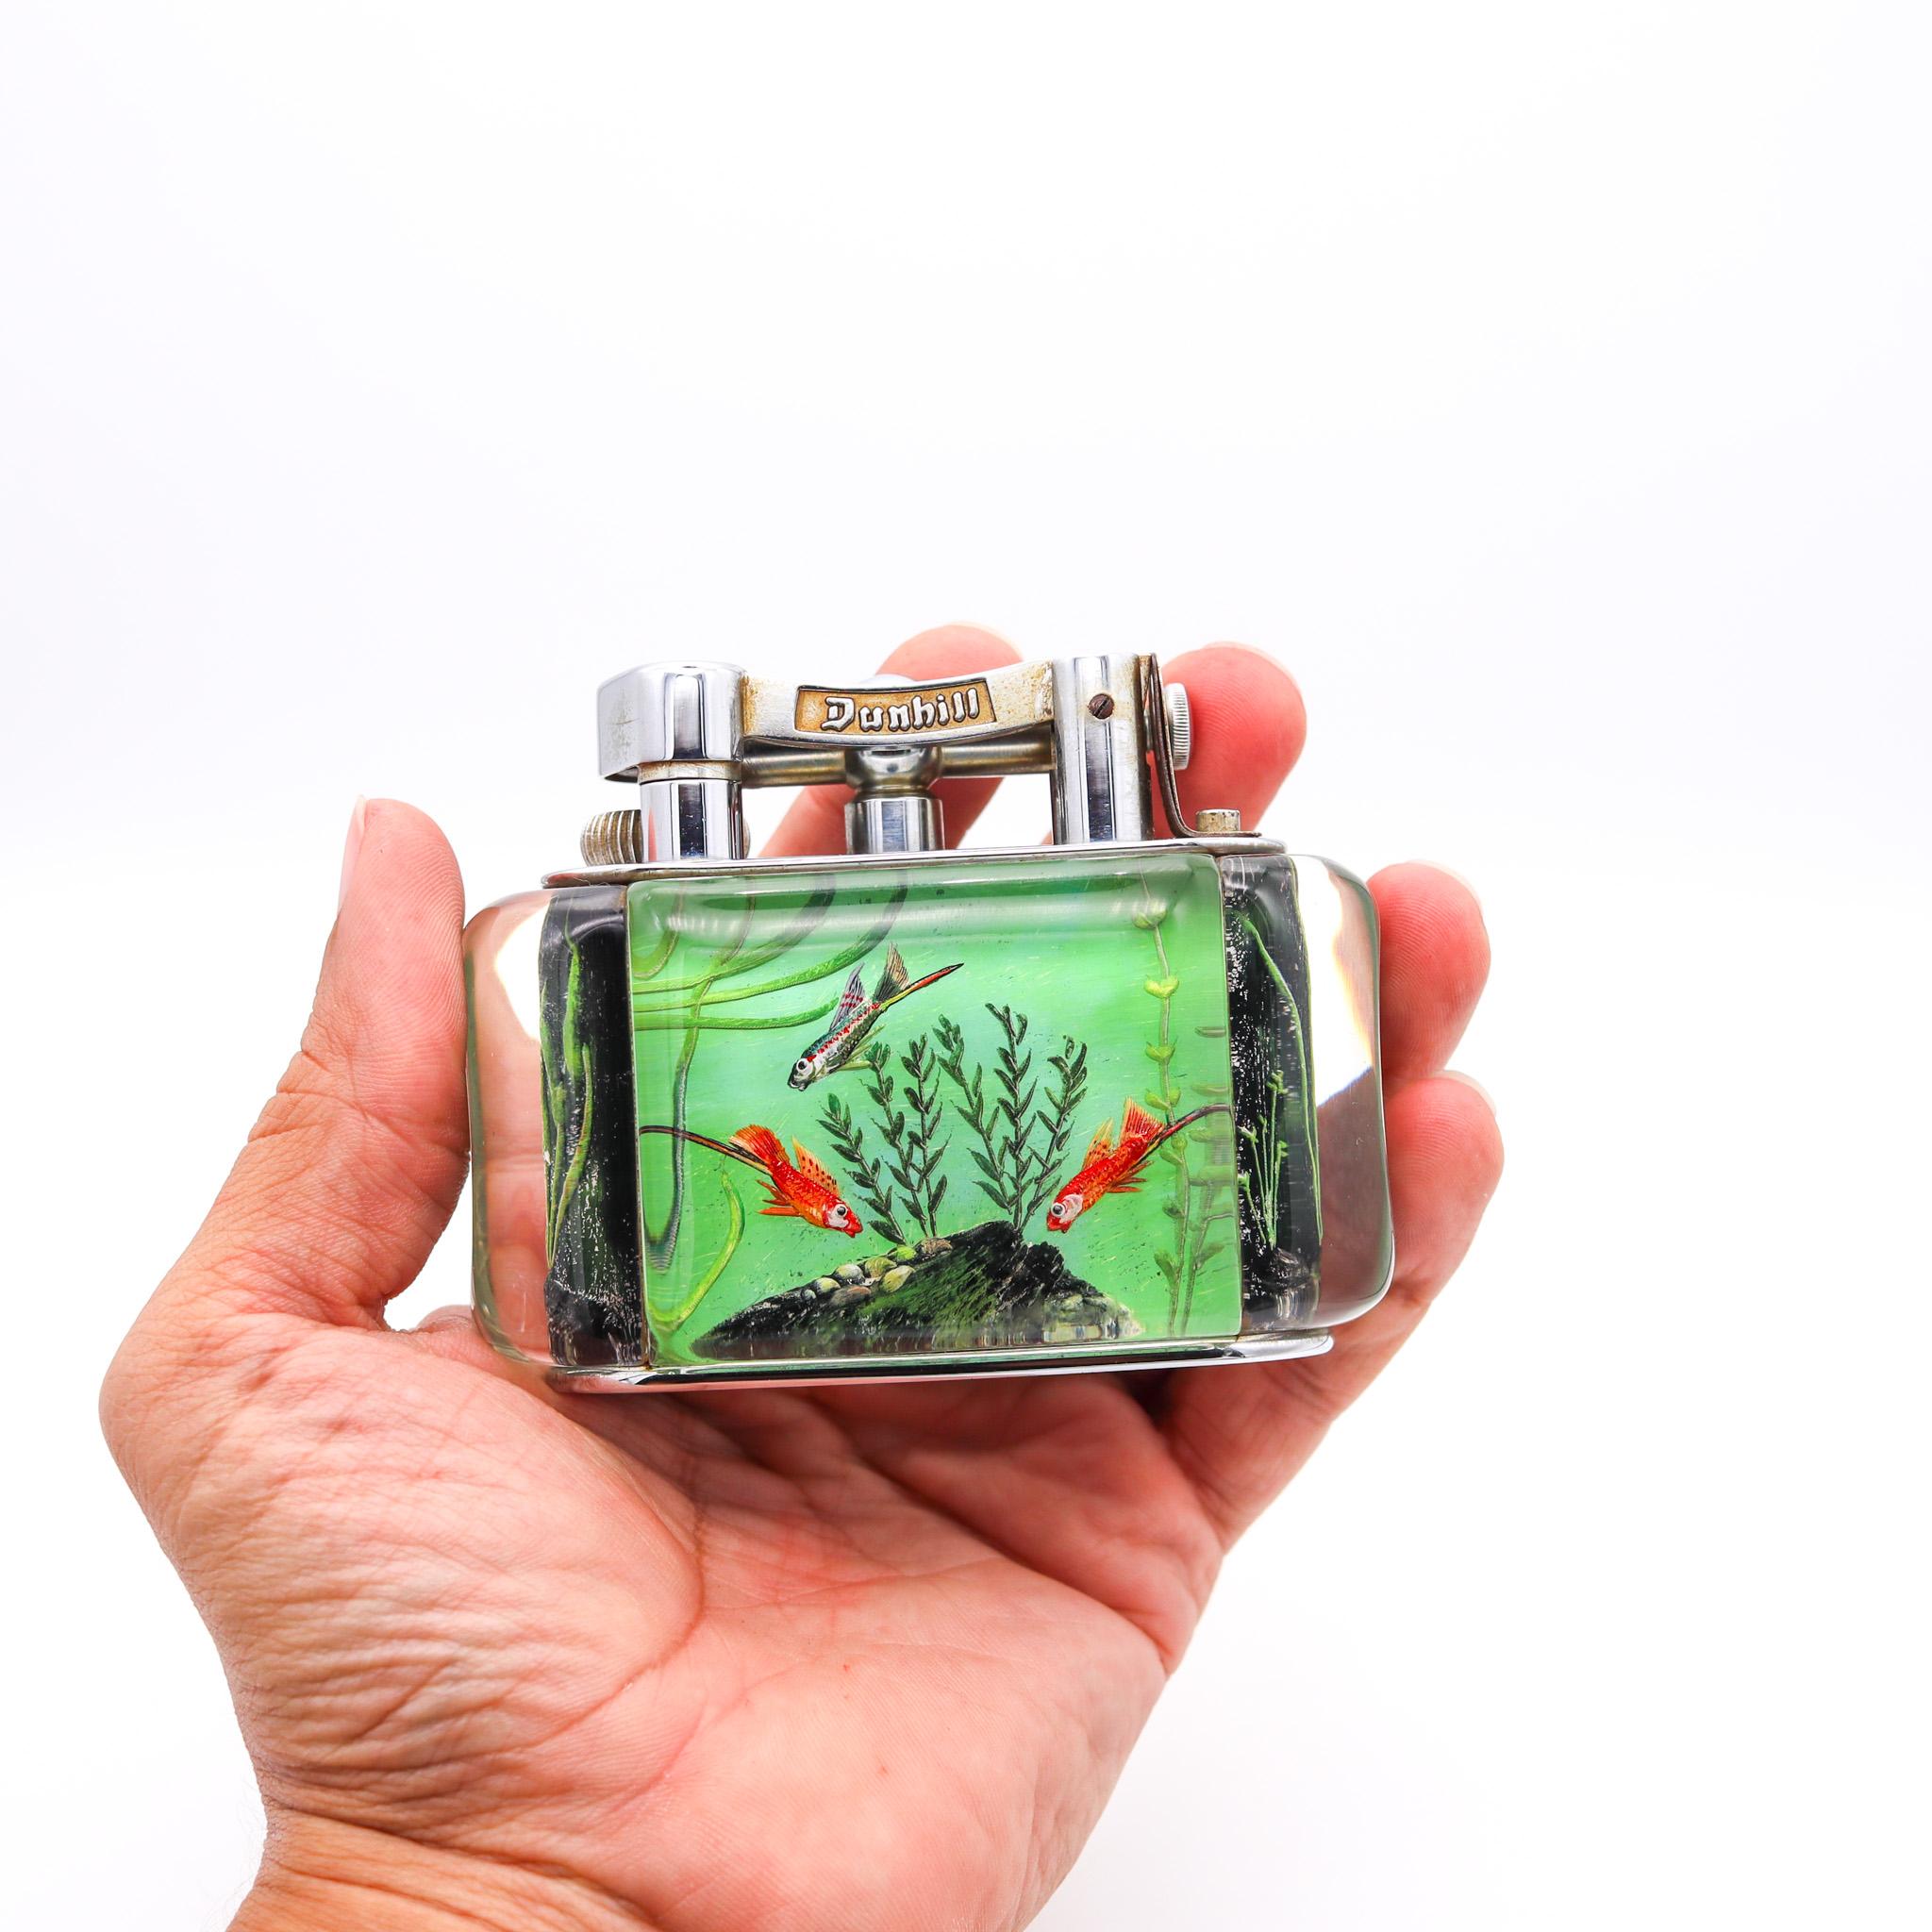 Mid-20th Century Alfred Dunhill 1949 Standard Aquarium Lift Arm Petrol Lighter In Perspex Lucite  For Sale